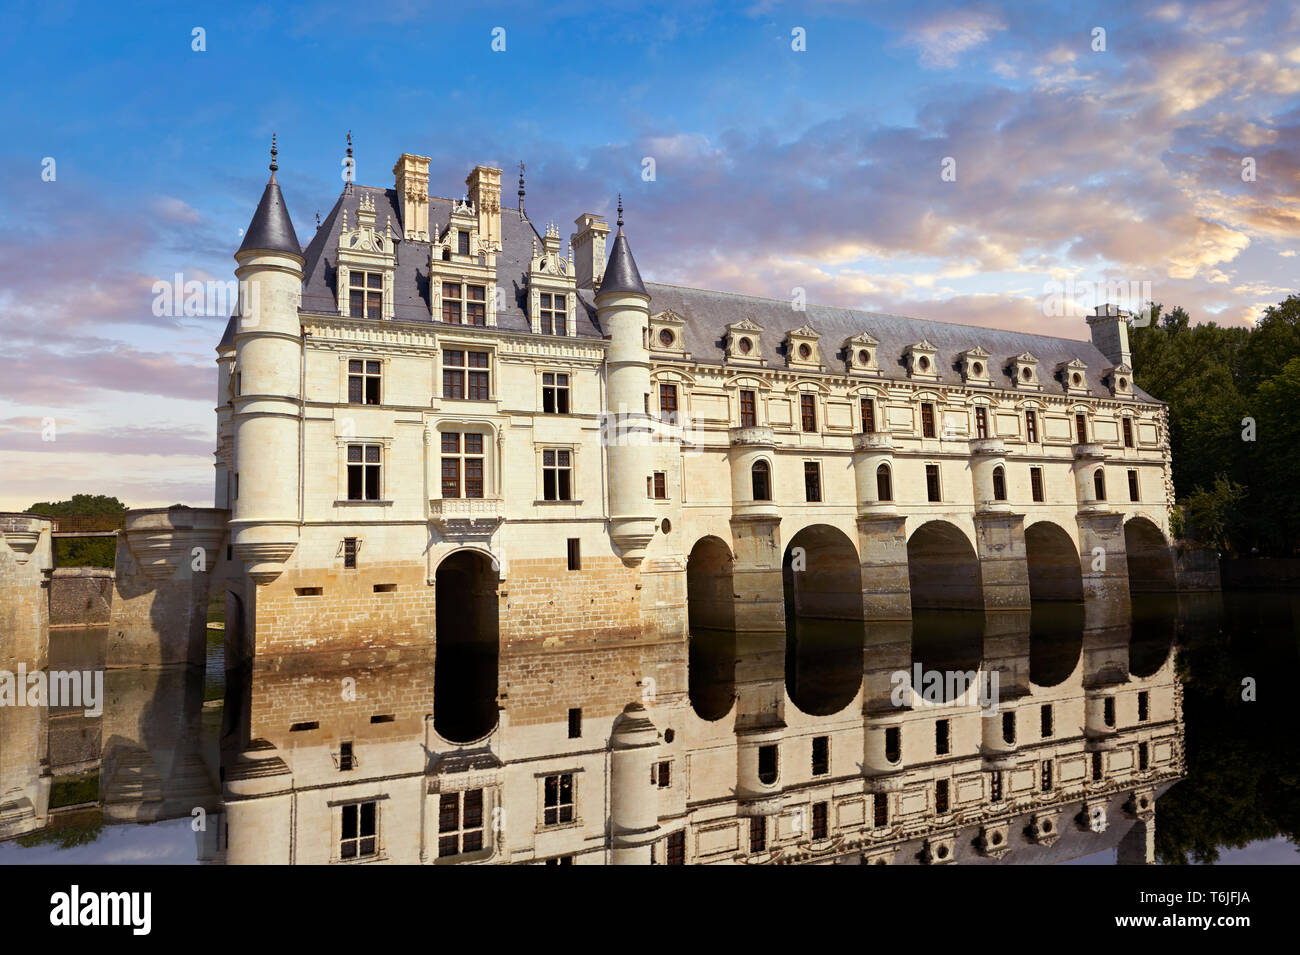 French Chateau de Chenonceau  spanning the River Cher in the the Loire Valley at sunset, Indre-et-Loire département, France Stock Photo